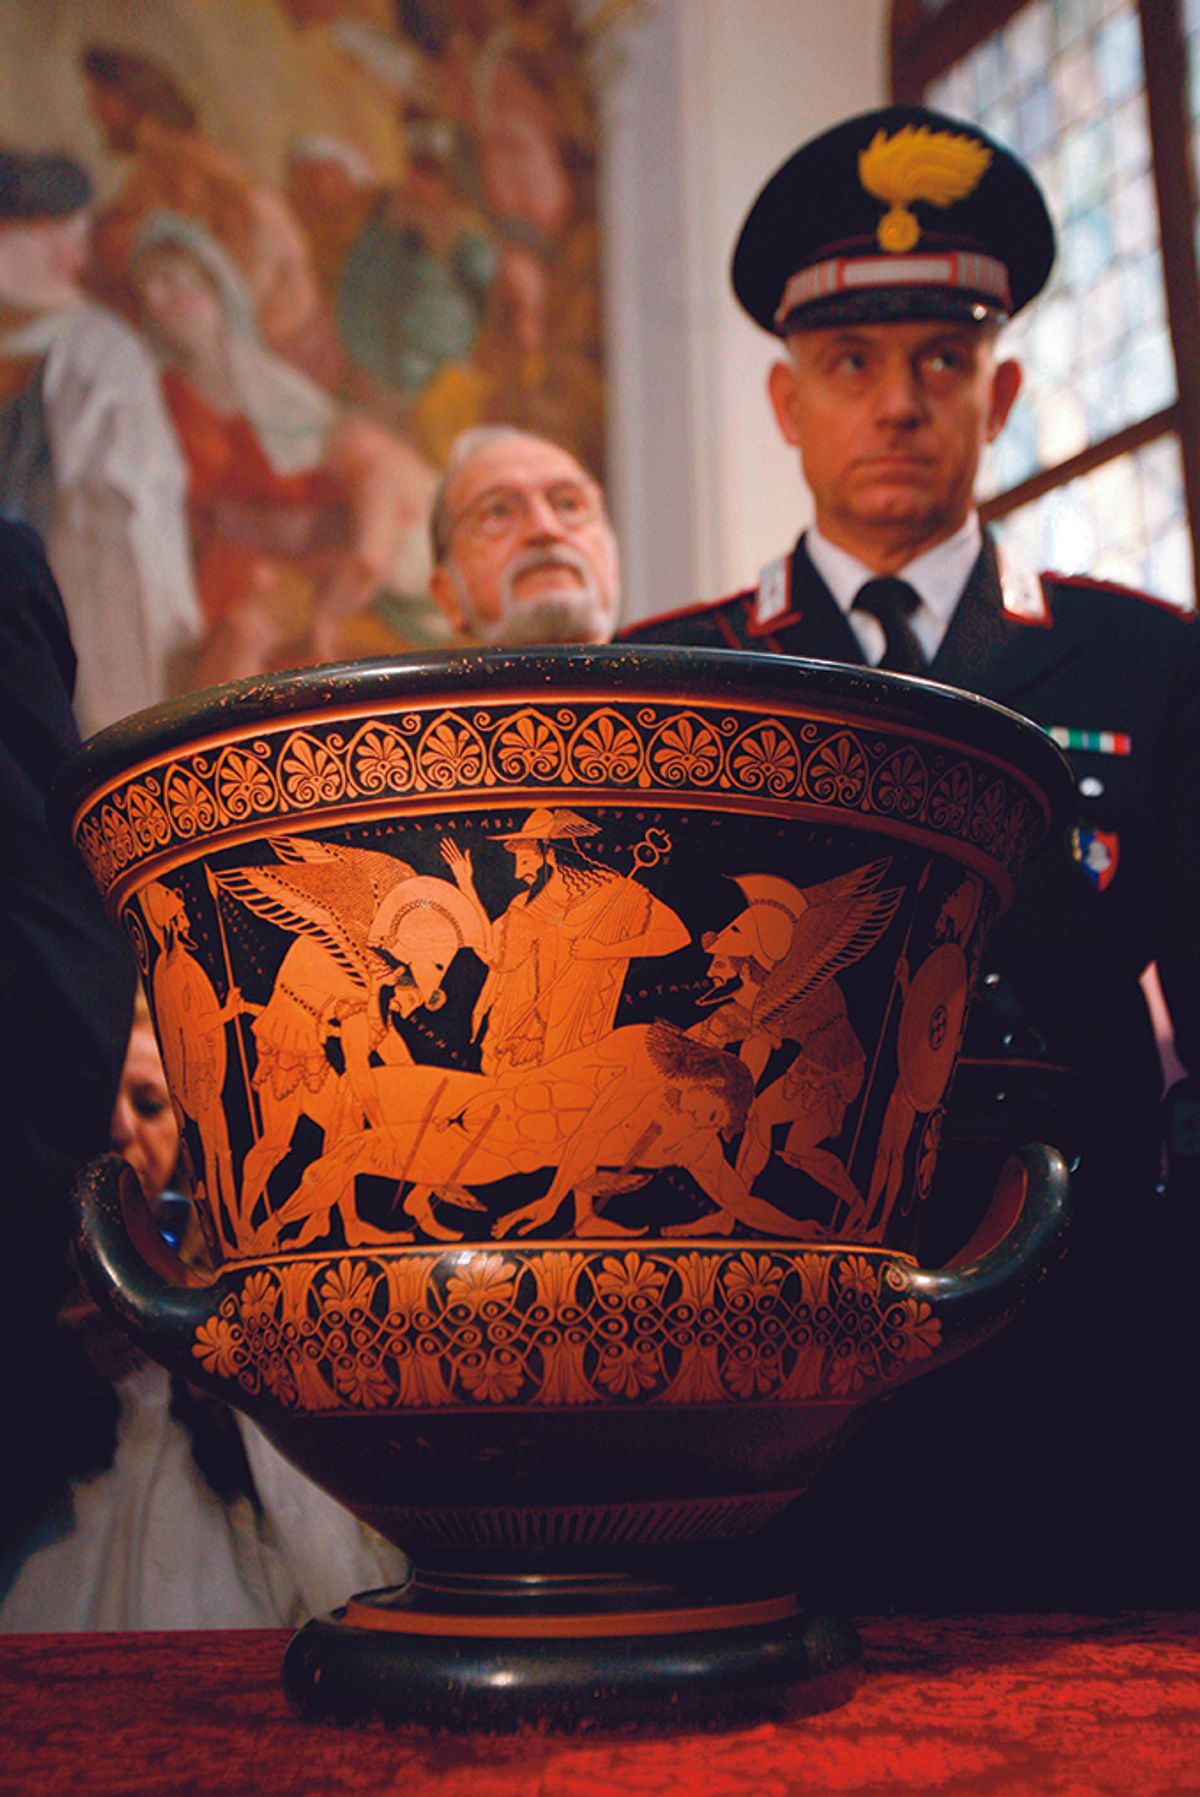 The Etruscan Euphronios Krater (515BC) was returned to Italy in 2008 by the Metropolitan Museum of Art; Monsignor Michele Basso owned an apparent copy of the precious, controversial Greek vase

Photo: Dario Pignatelli/REUTERS